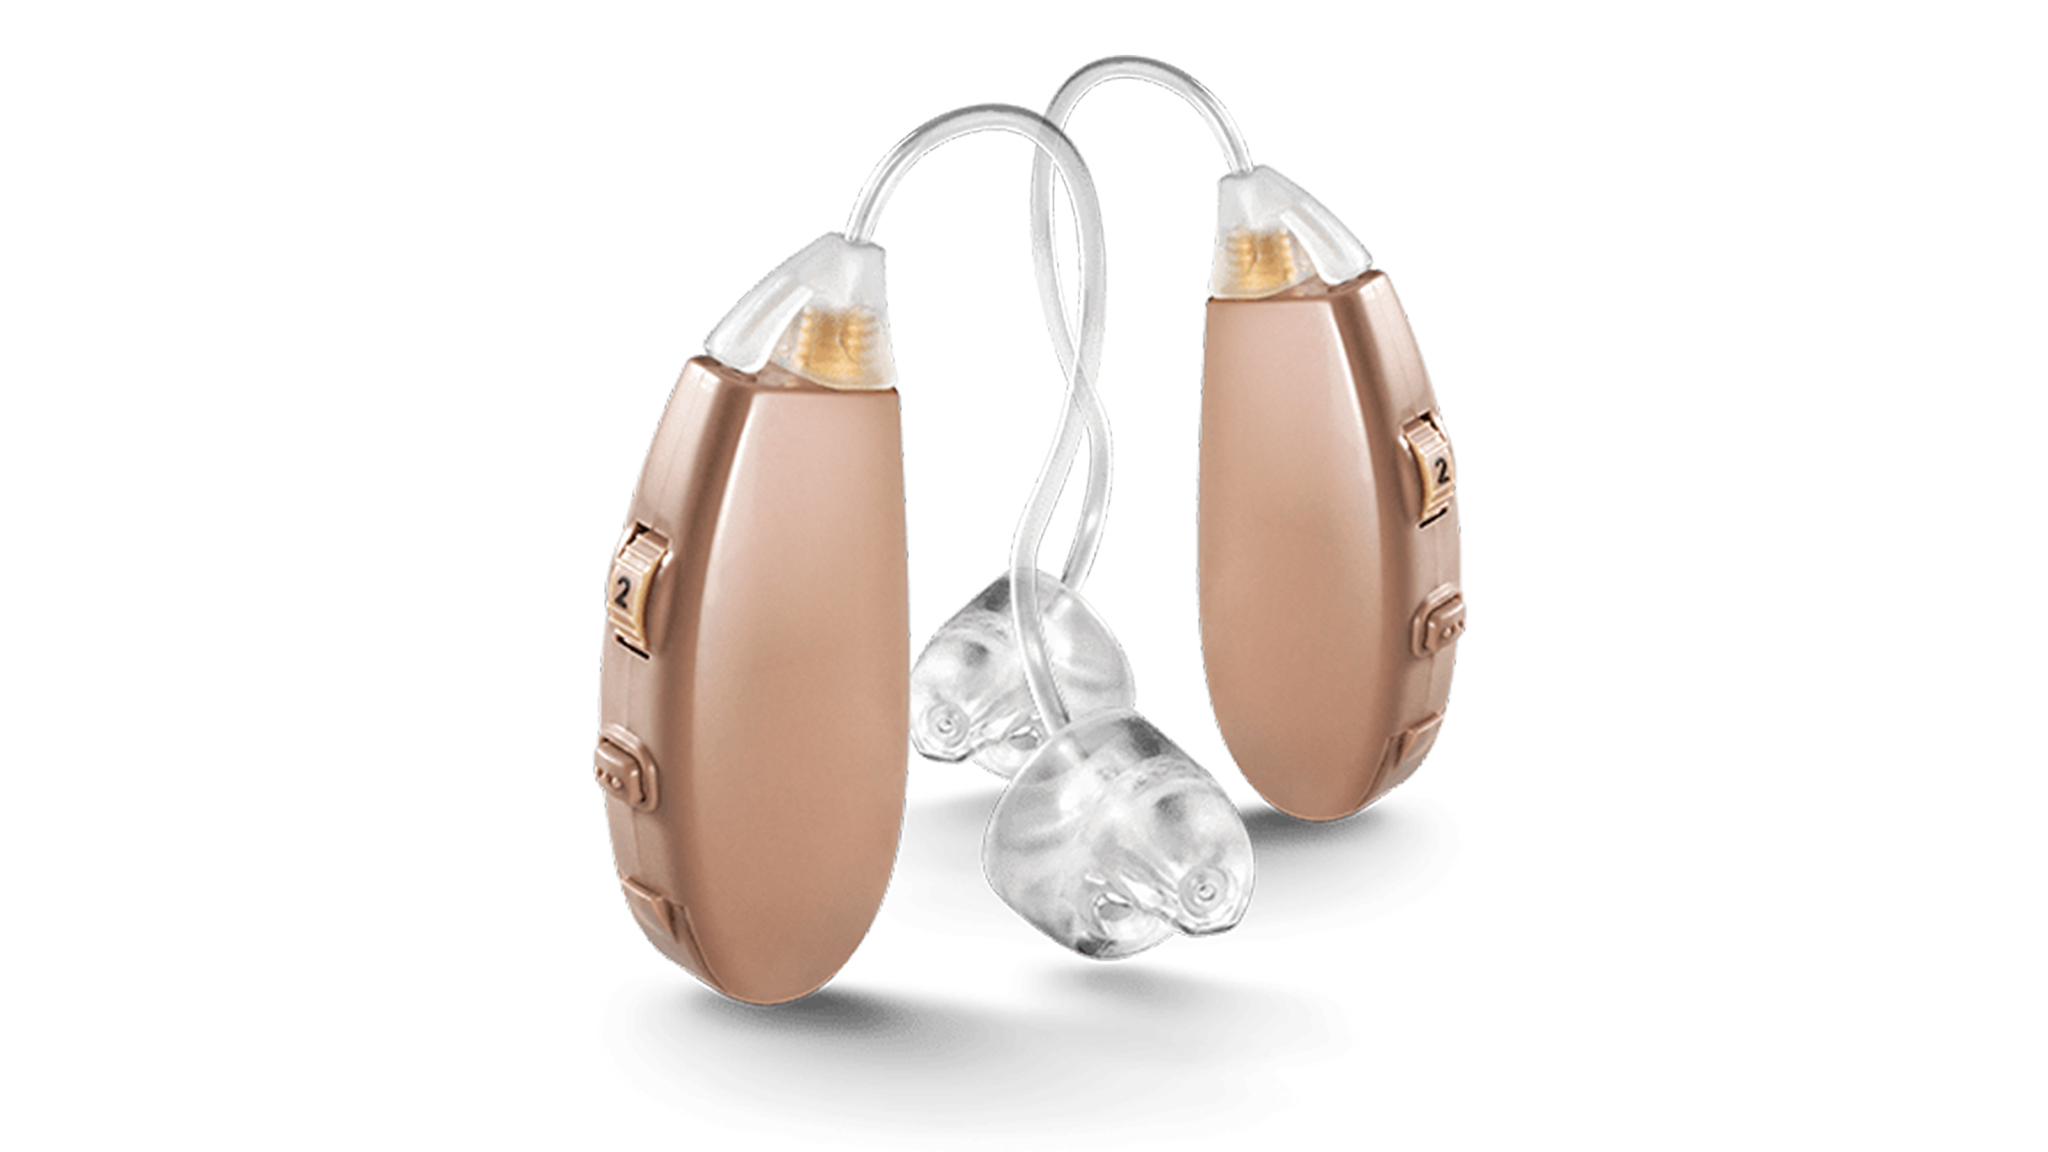 Ear Nose and Throat - The Audiologist's Guide to Hearing Aid Care & Cleaning